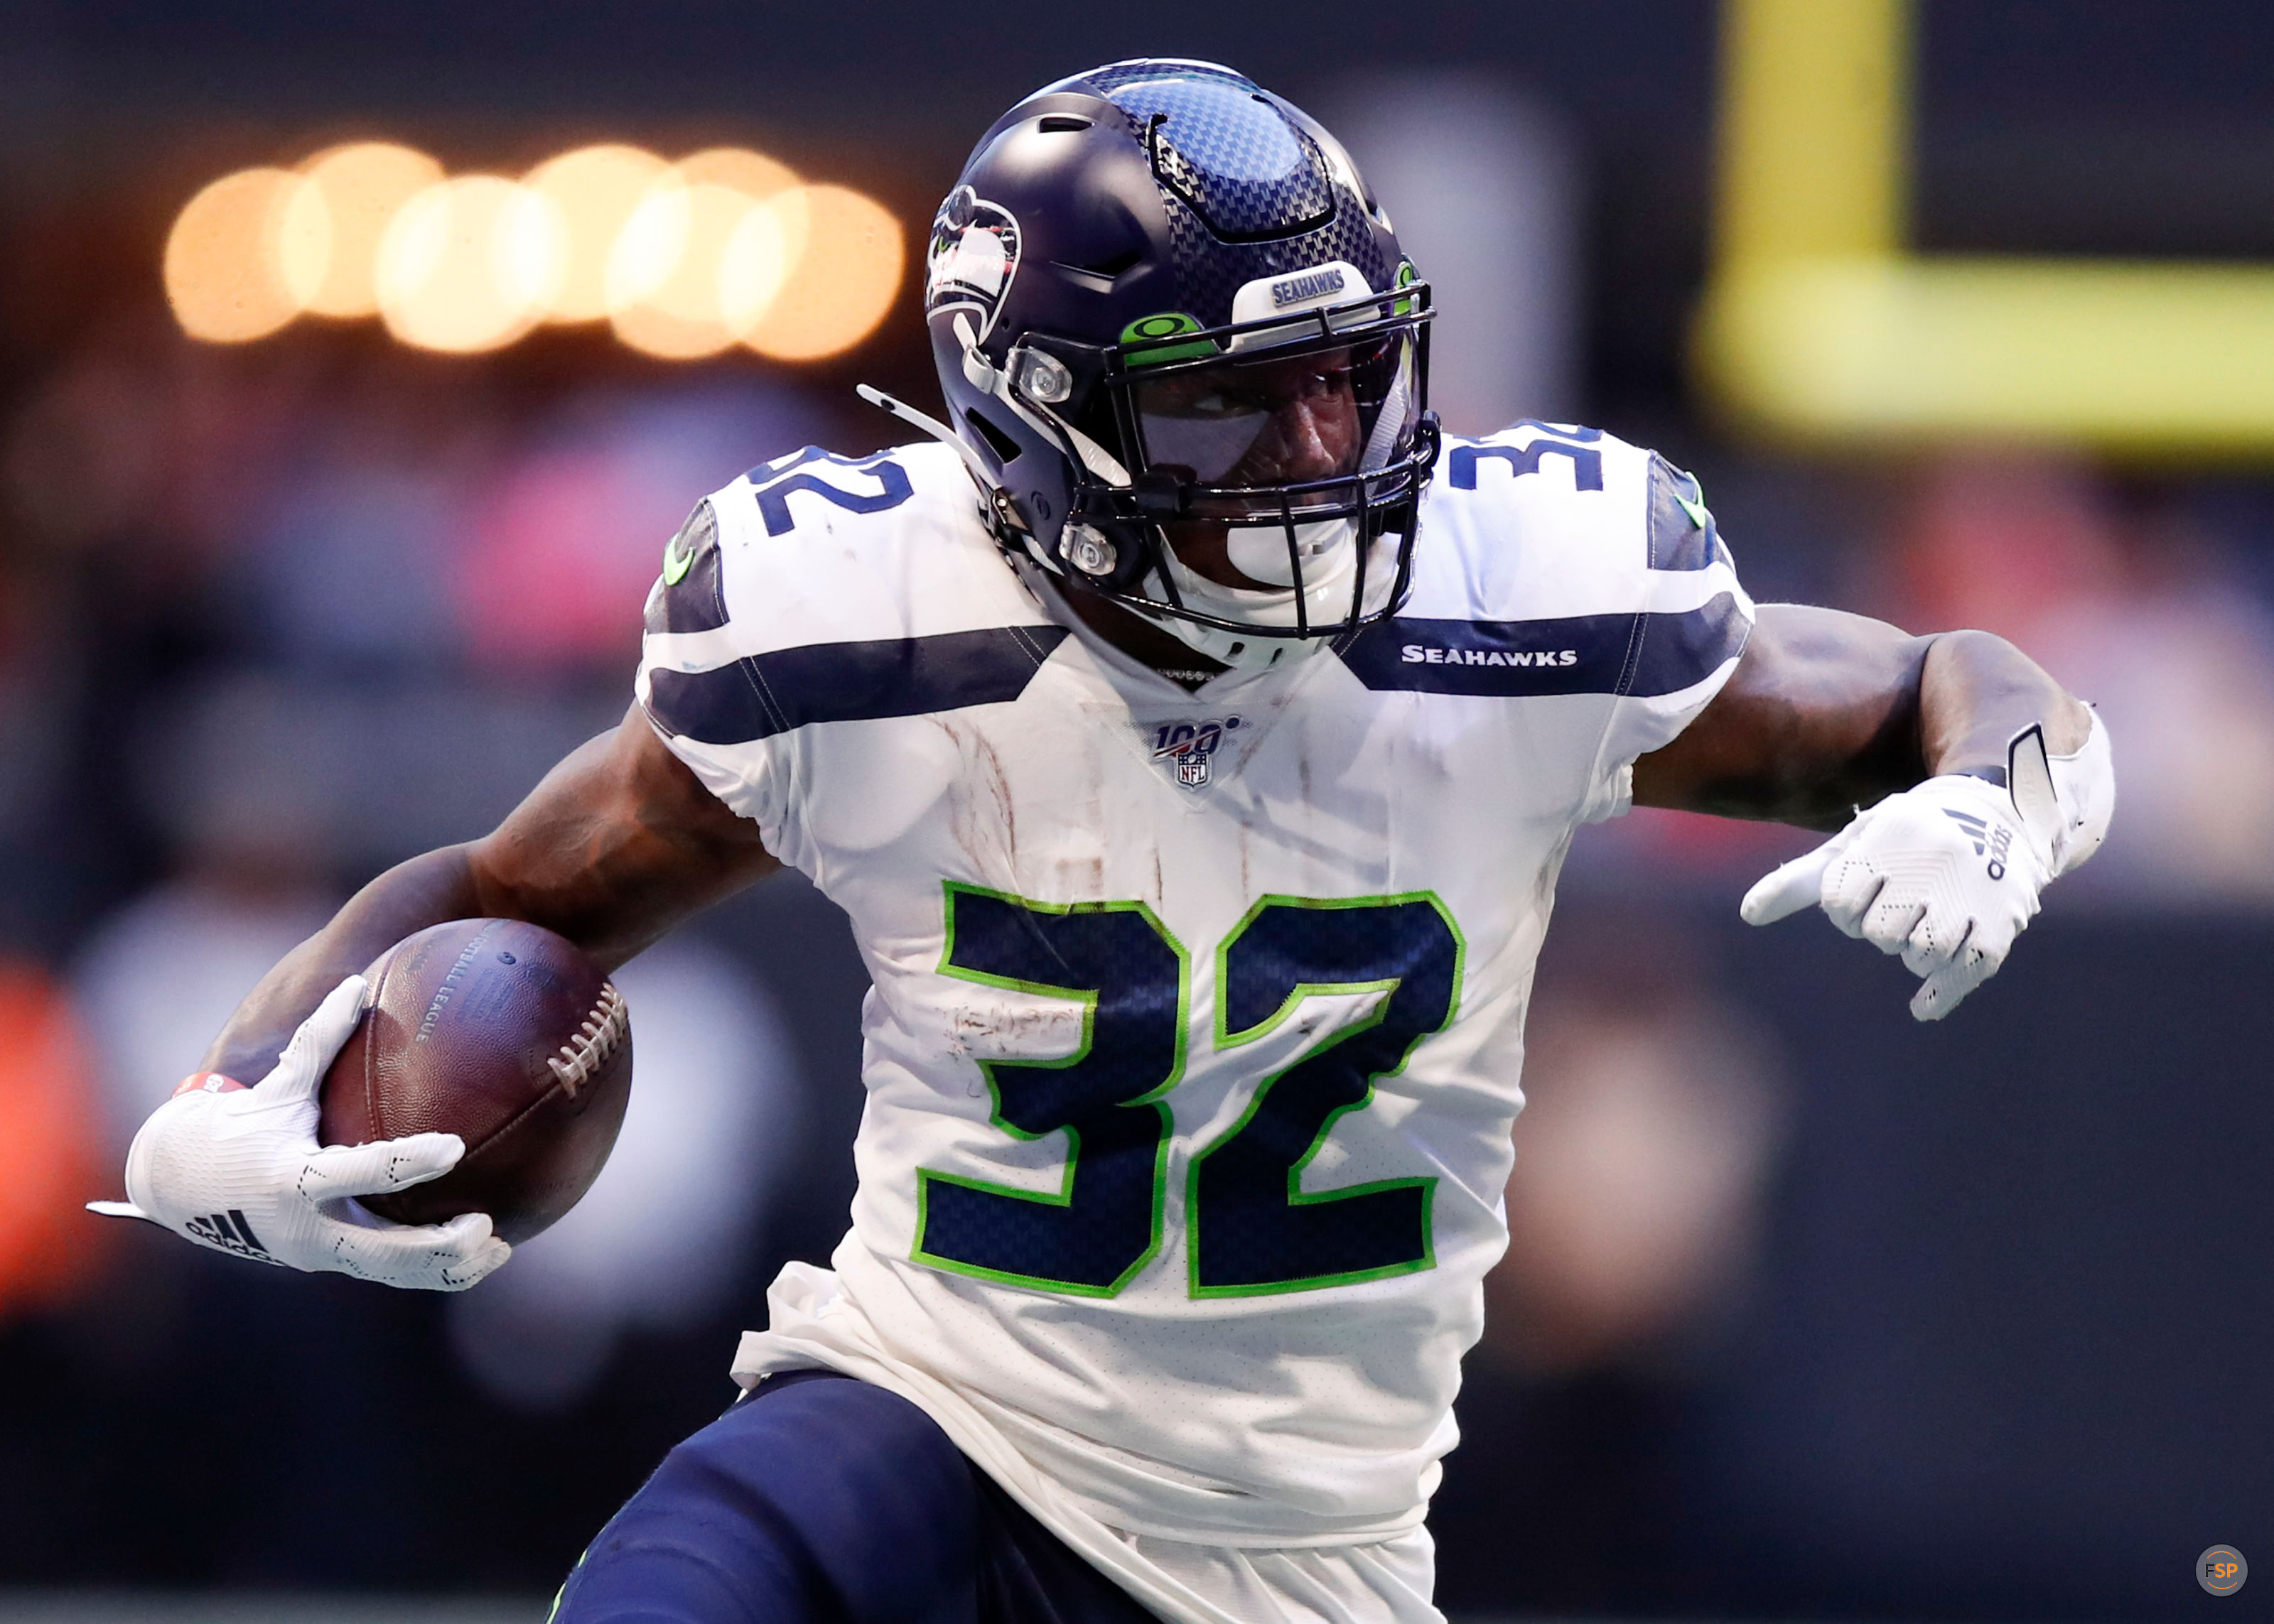 ATLANTA, GA - OCTOBER 27: Chris Carson #32 of the Seattle Seahawks rushes in the first half of an NFL game against the Atlanta Falcons at Mercedes-Benz Stadium on October 27, 2019 in Atlanta, Georgia. (Photo by Todd Kirkland/Getty Images) *** Local Caption *** Chris Carson